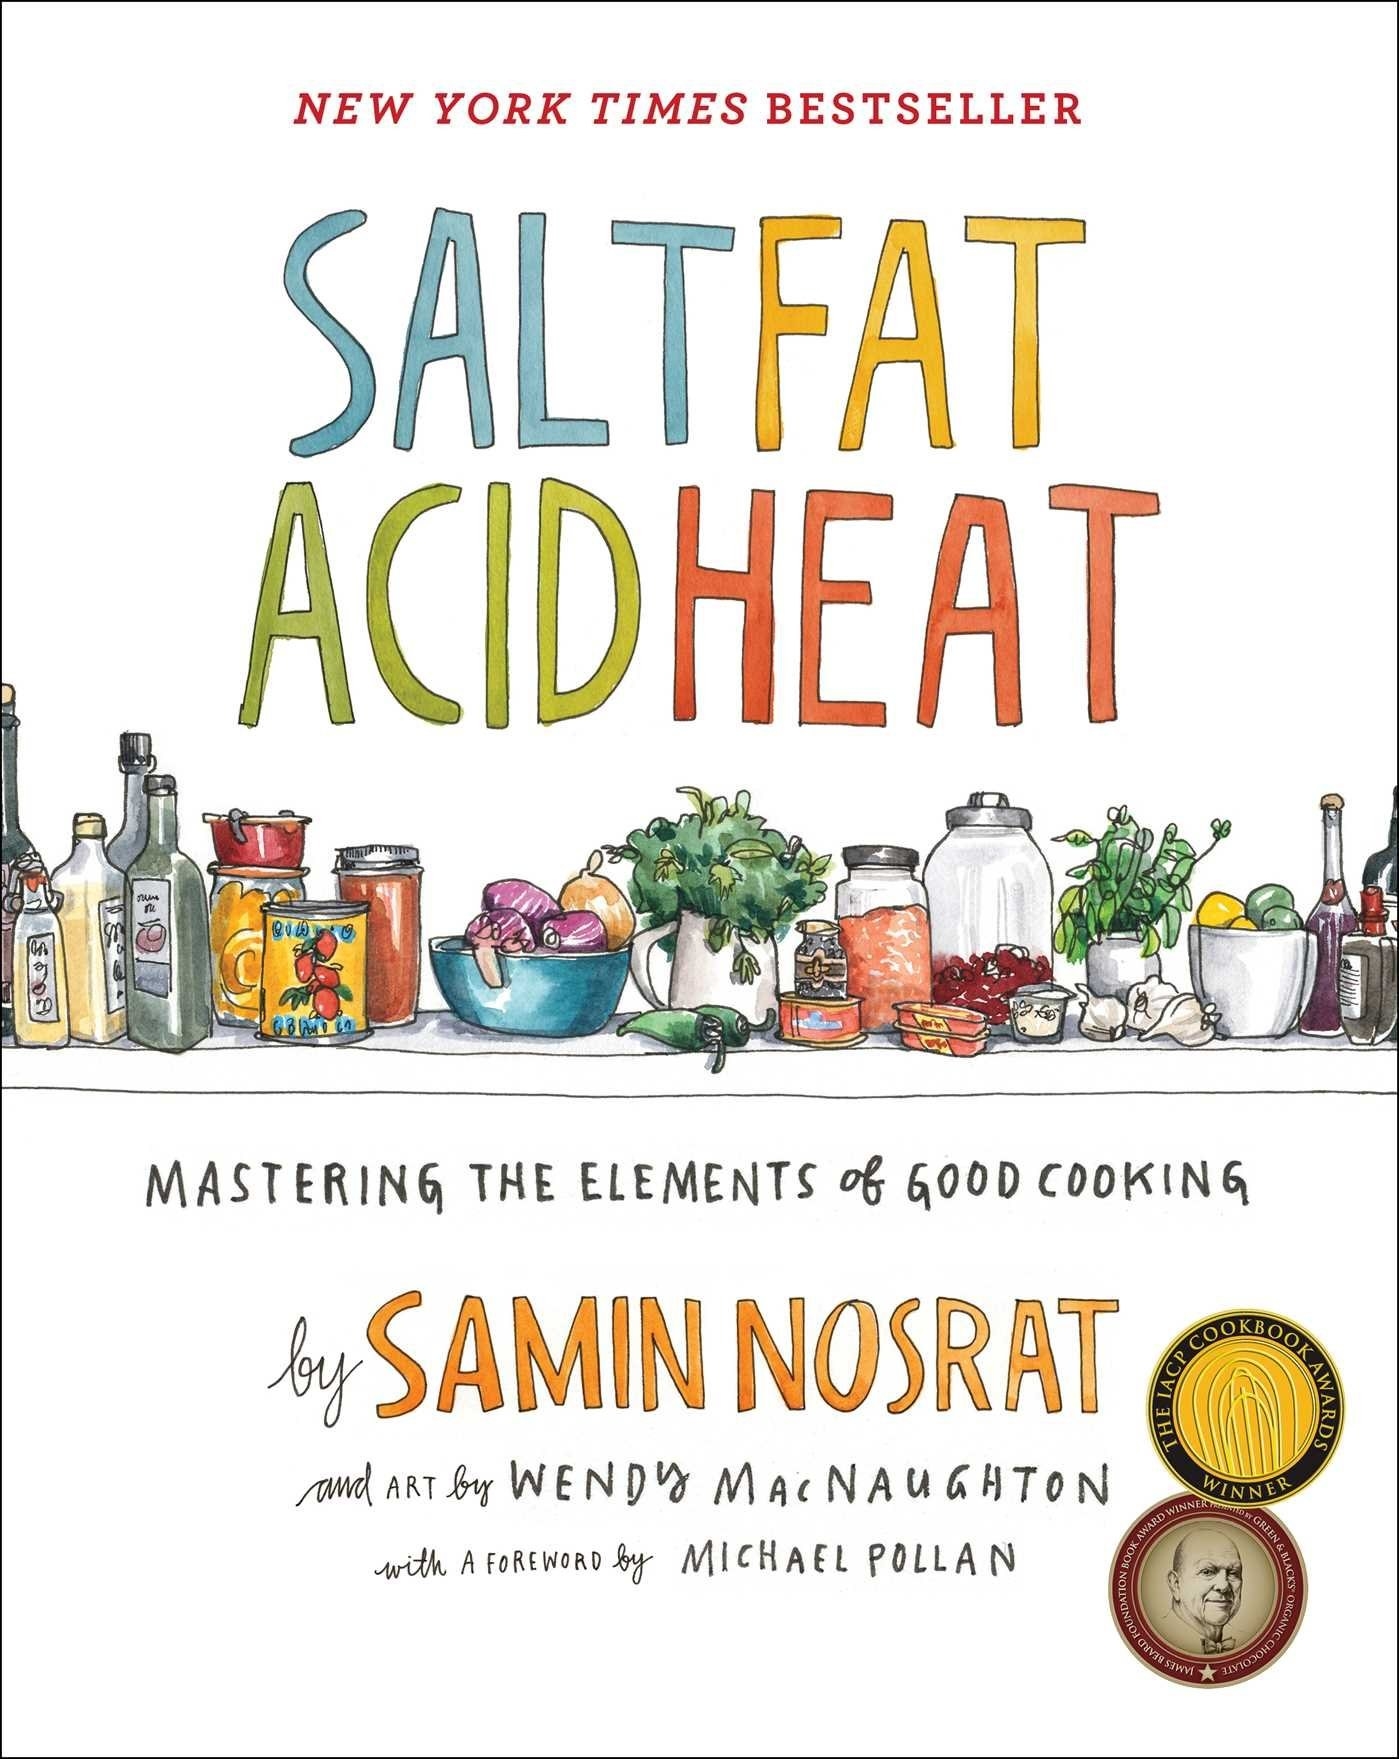 The cover of the book by Samin Nosrat